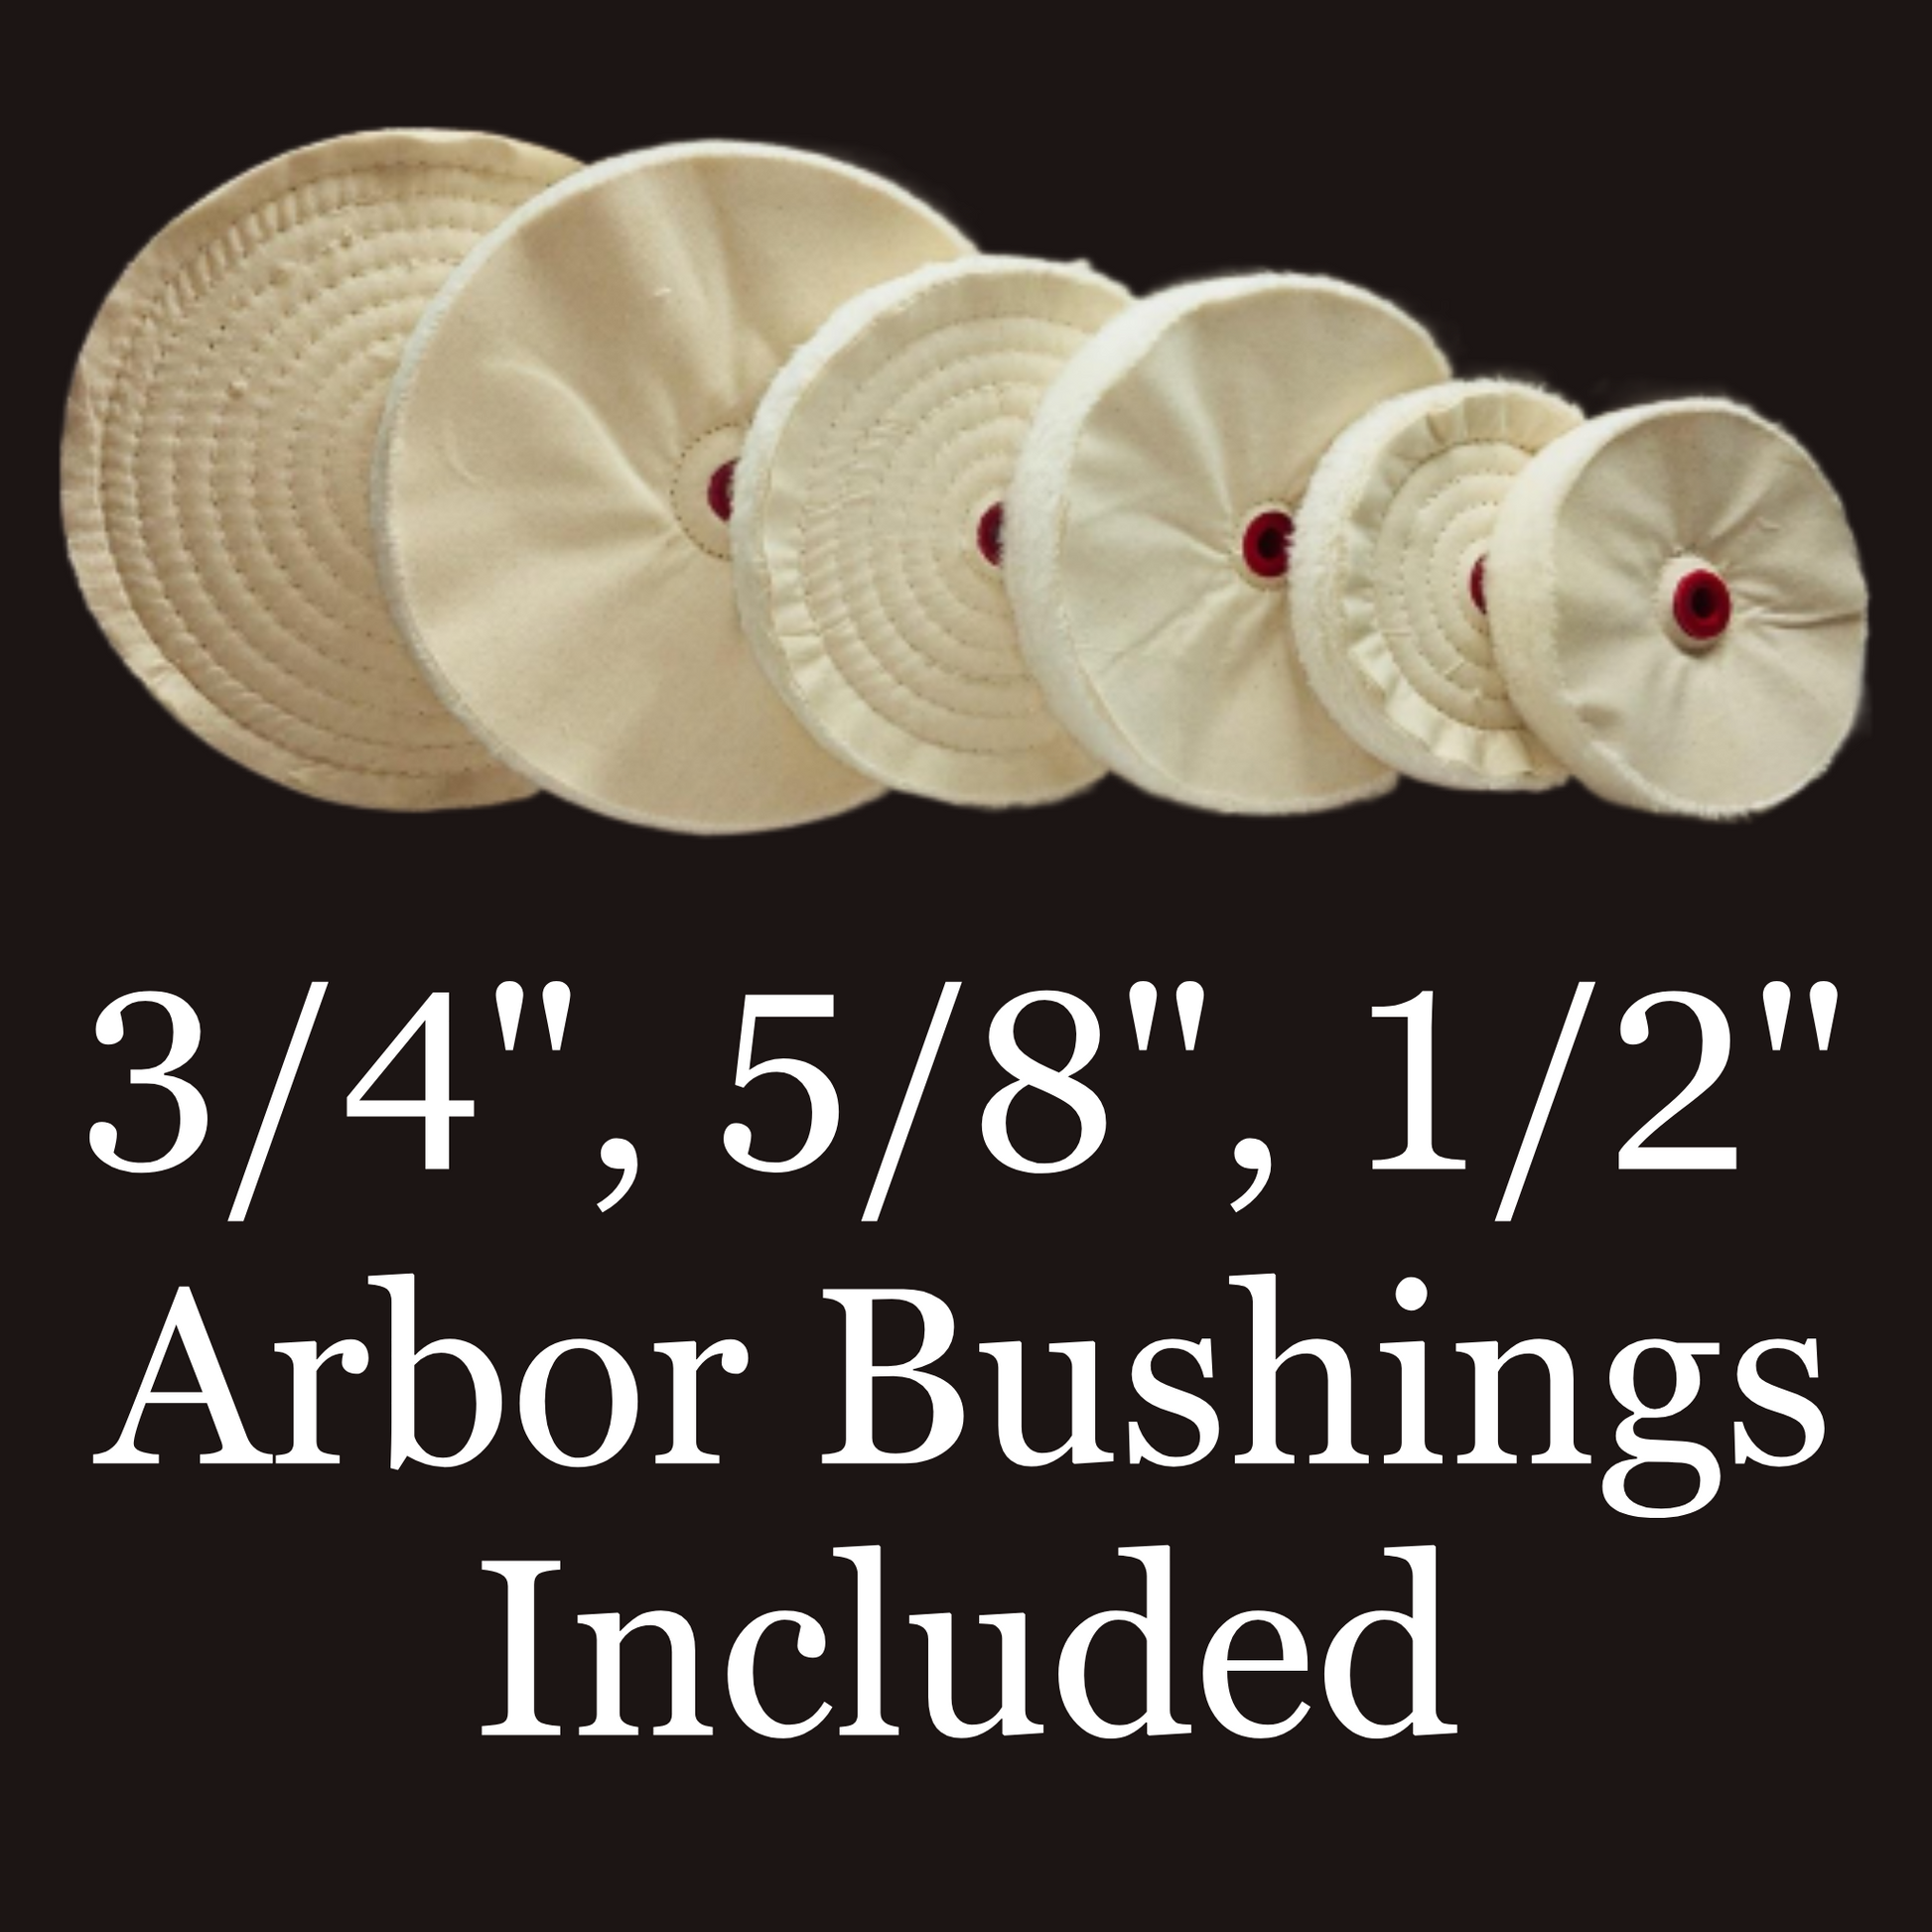 Loose Sewn Cotton Buffing Wheels with 3/4”, 5/8”,1/2” Arbors